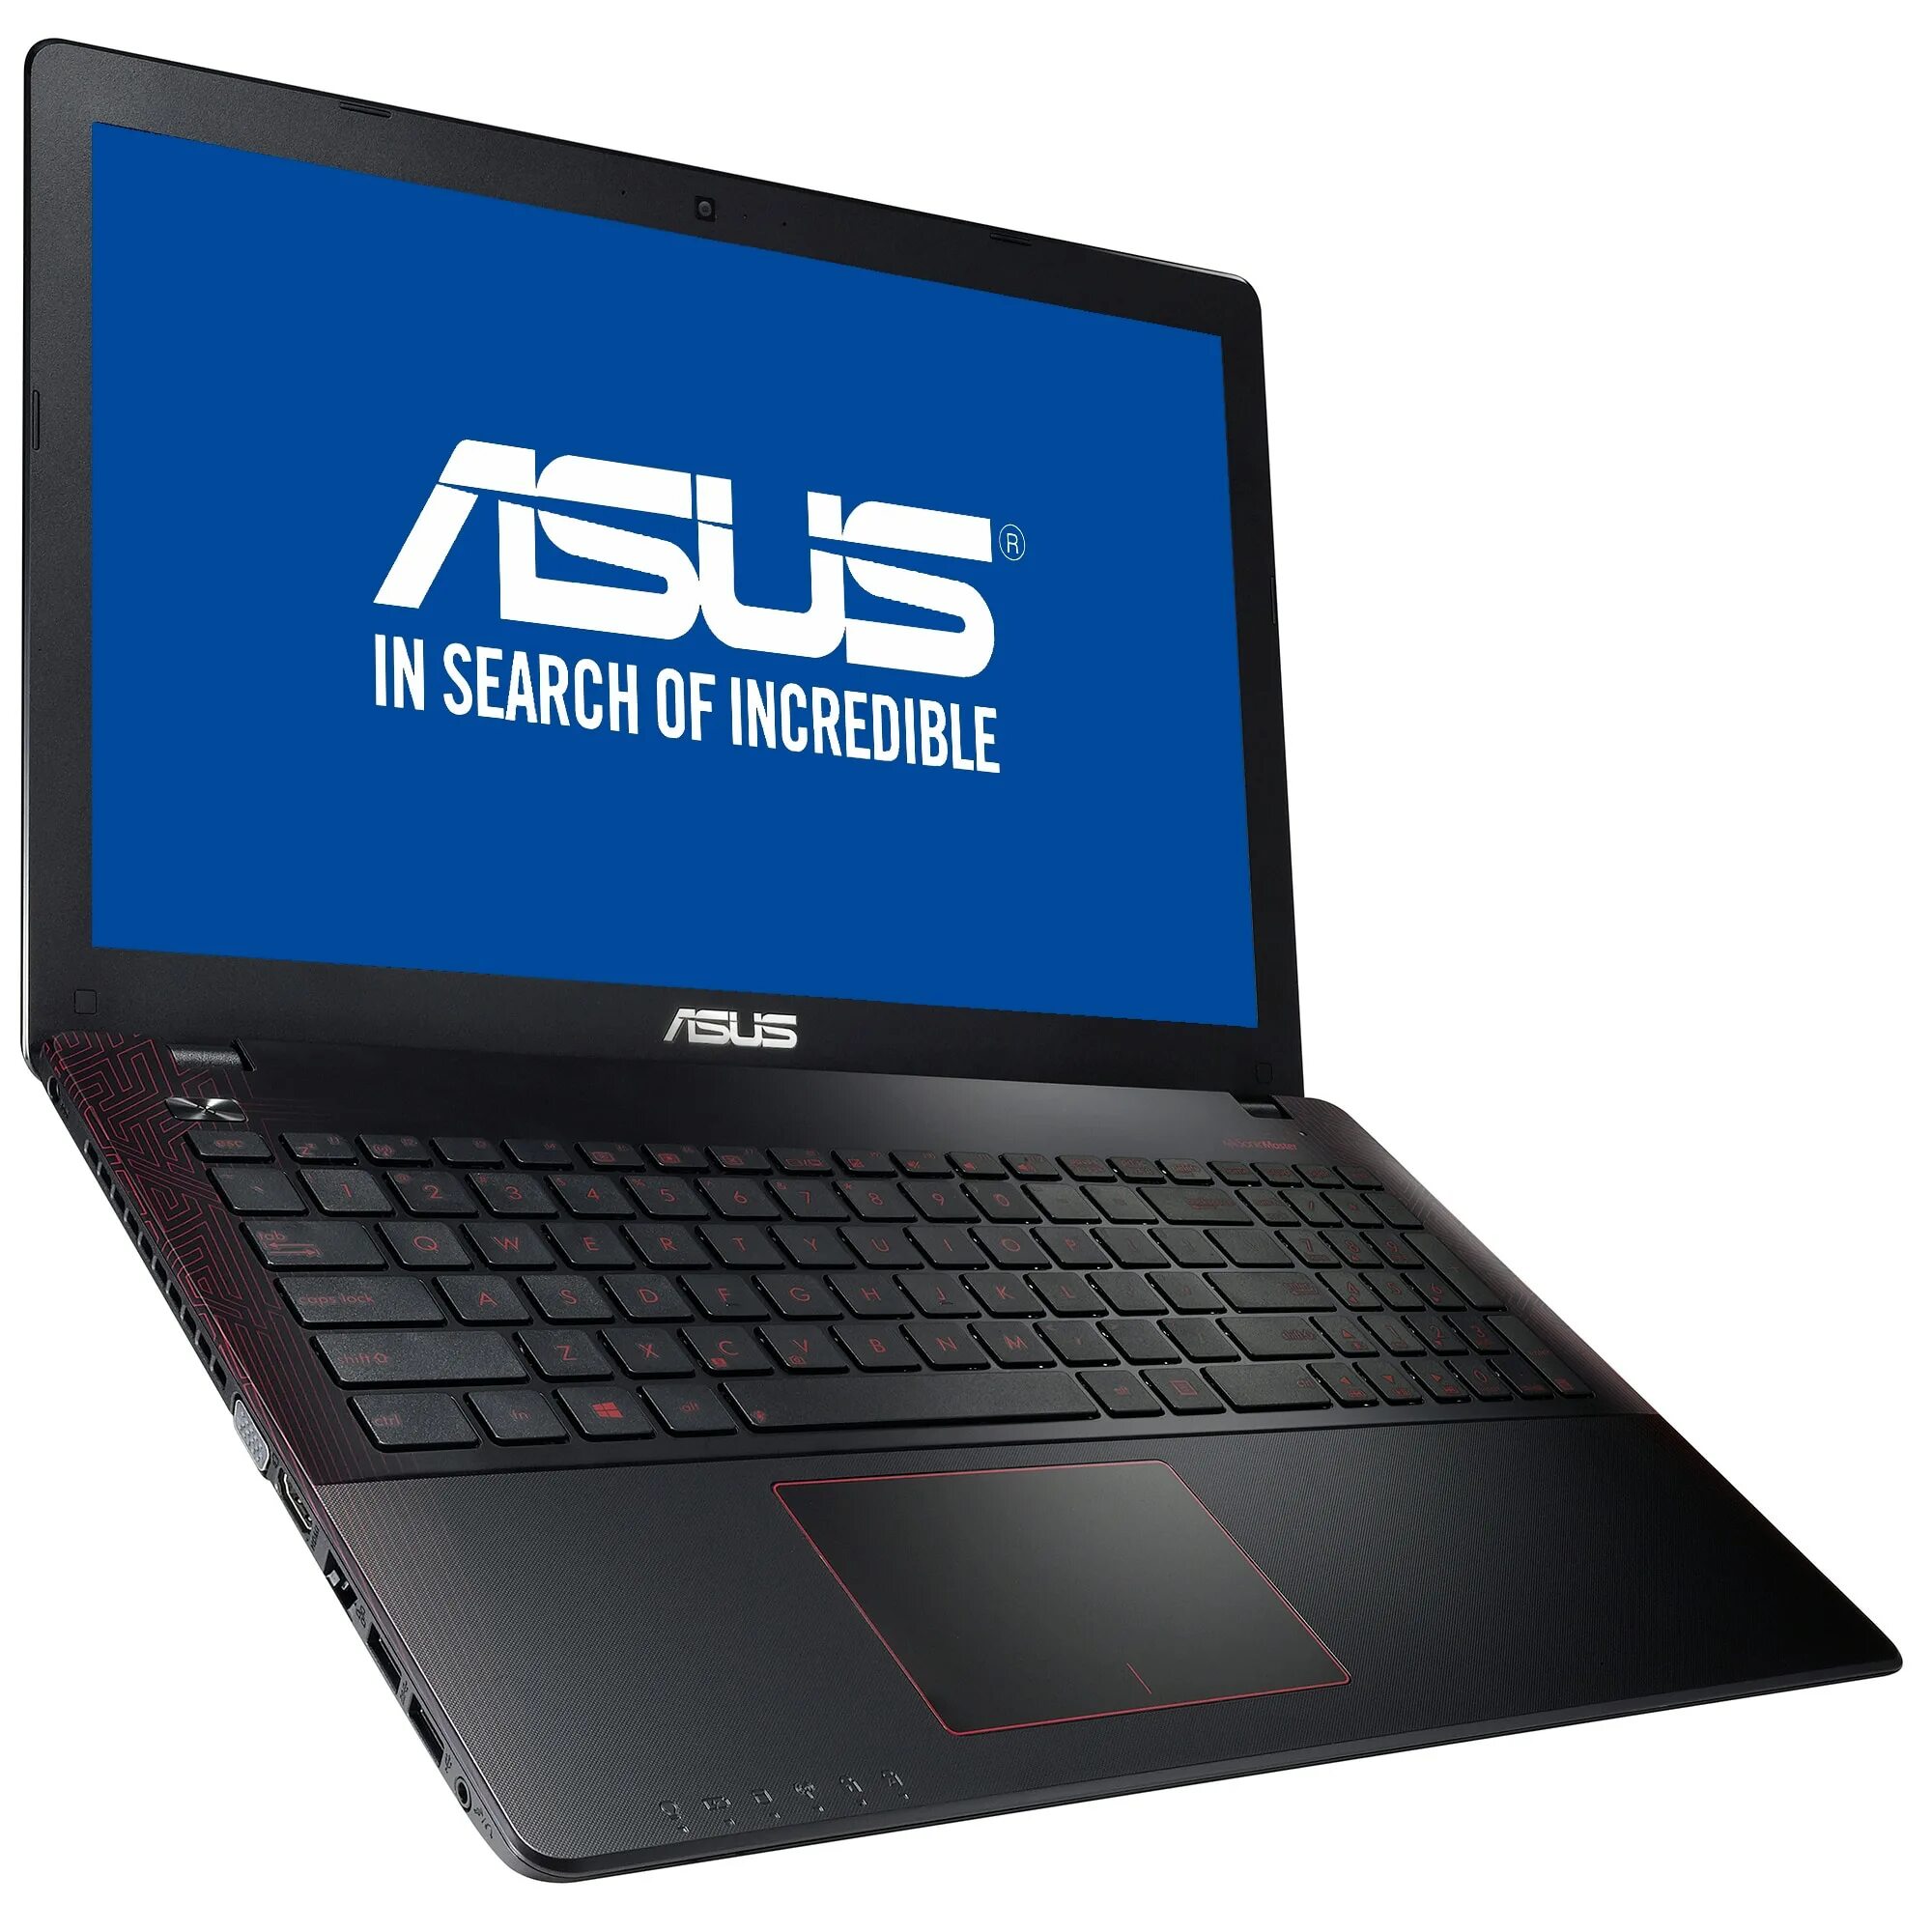 ASUS r510. ASUS i7 6700hq. Асус f550jx. ASUS ноутбук gtx950m Haswell. Asus x705m